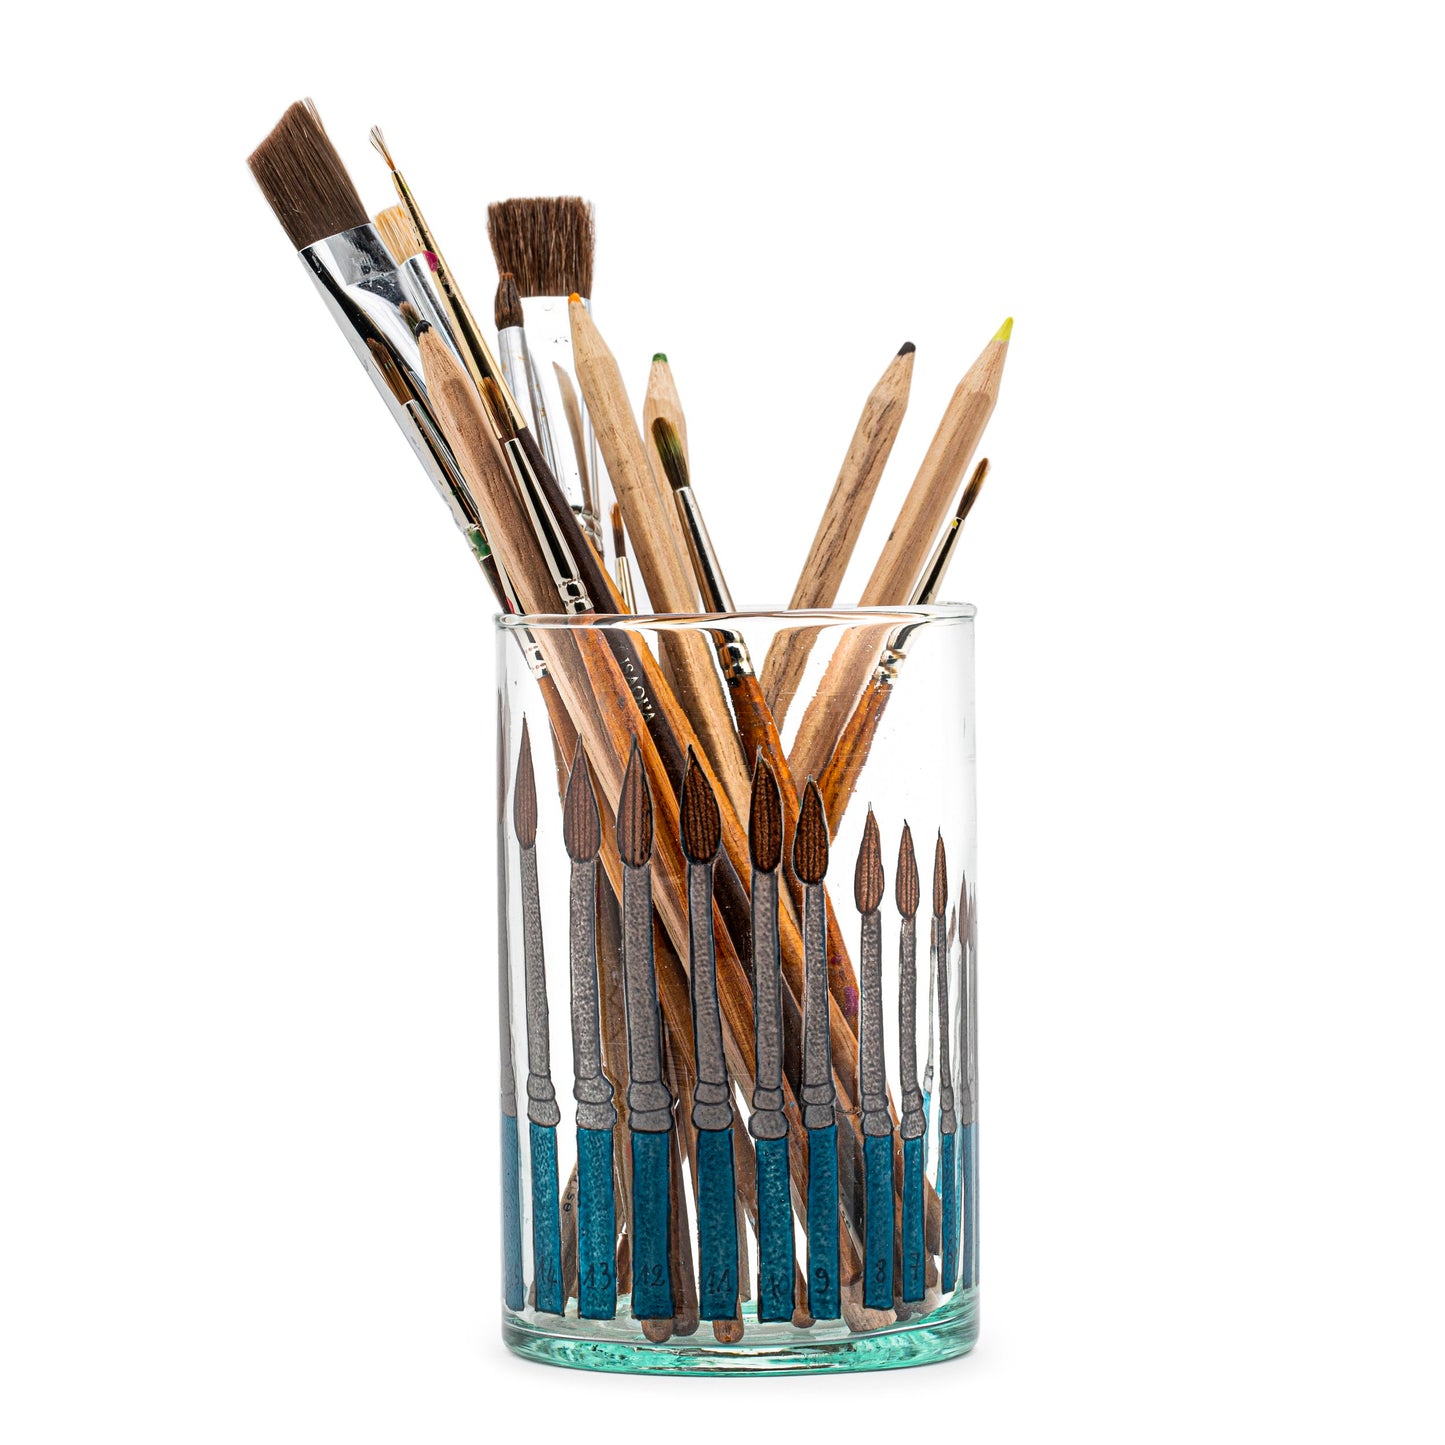 Hand painted glass | PAINT BRUSHES